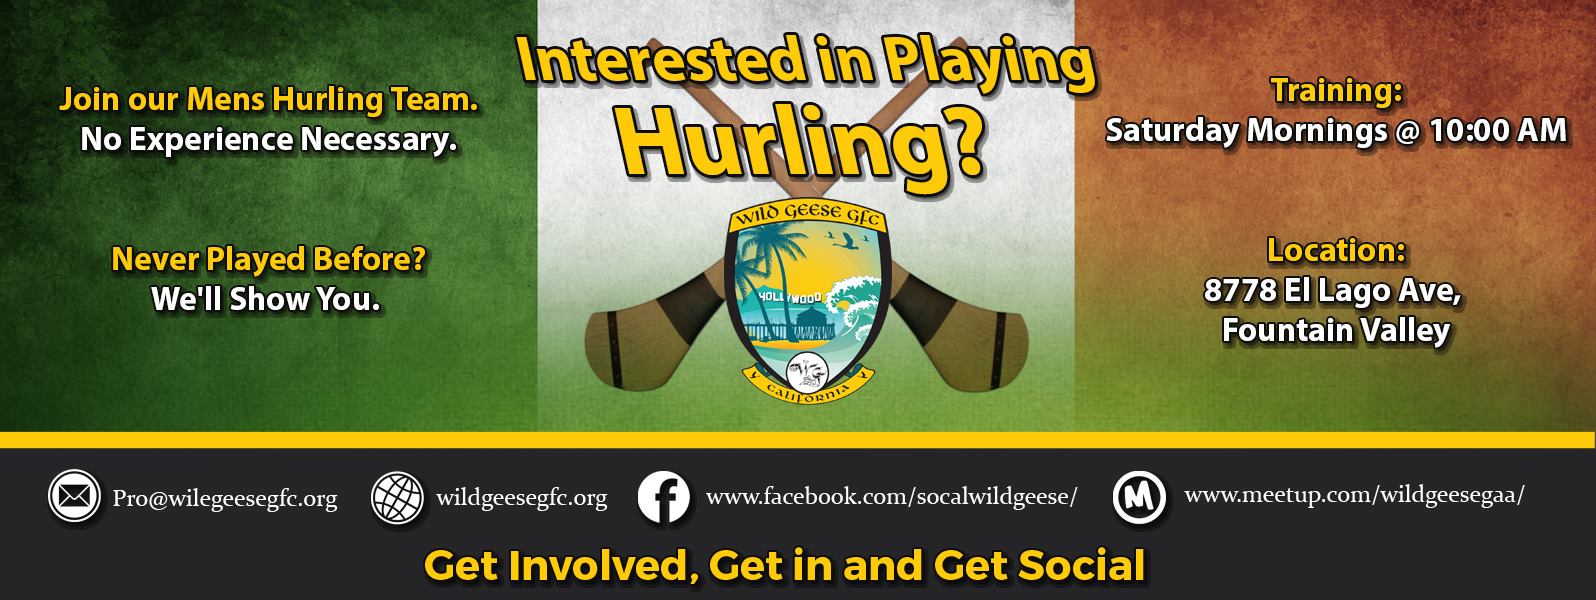 Wild Geese Hurling Interested in Playing Hurling in the OC